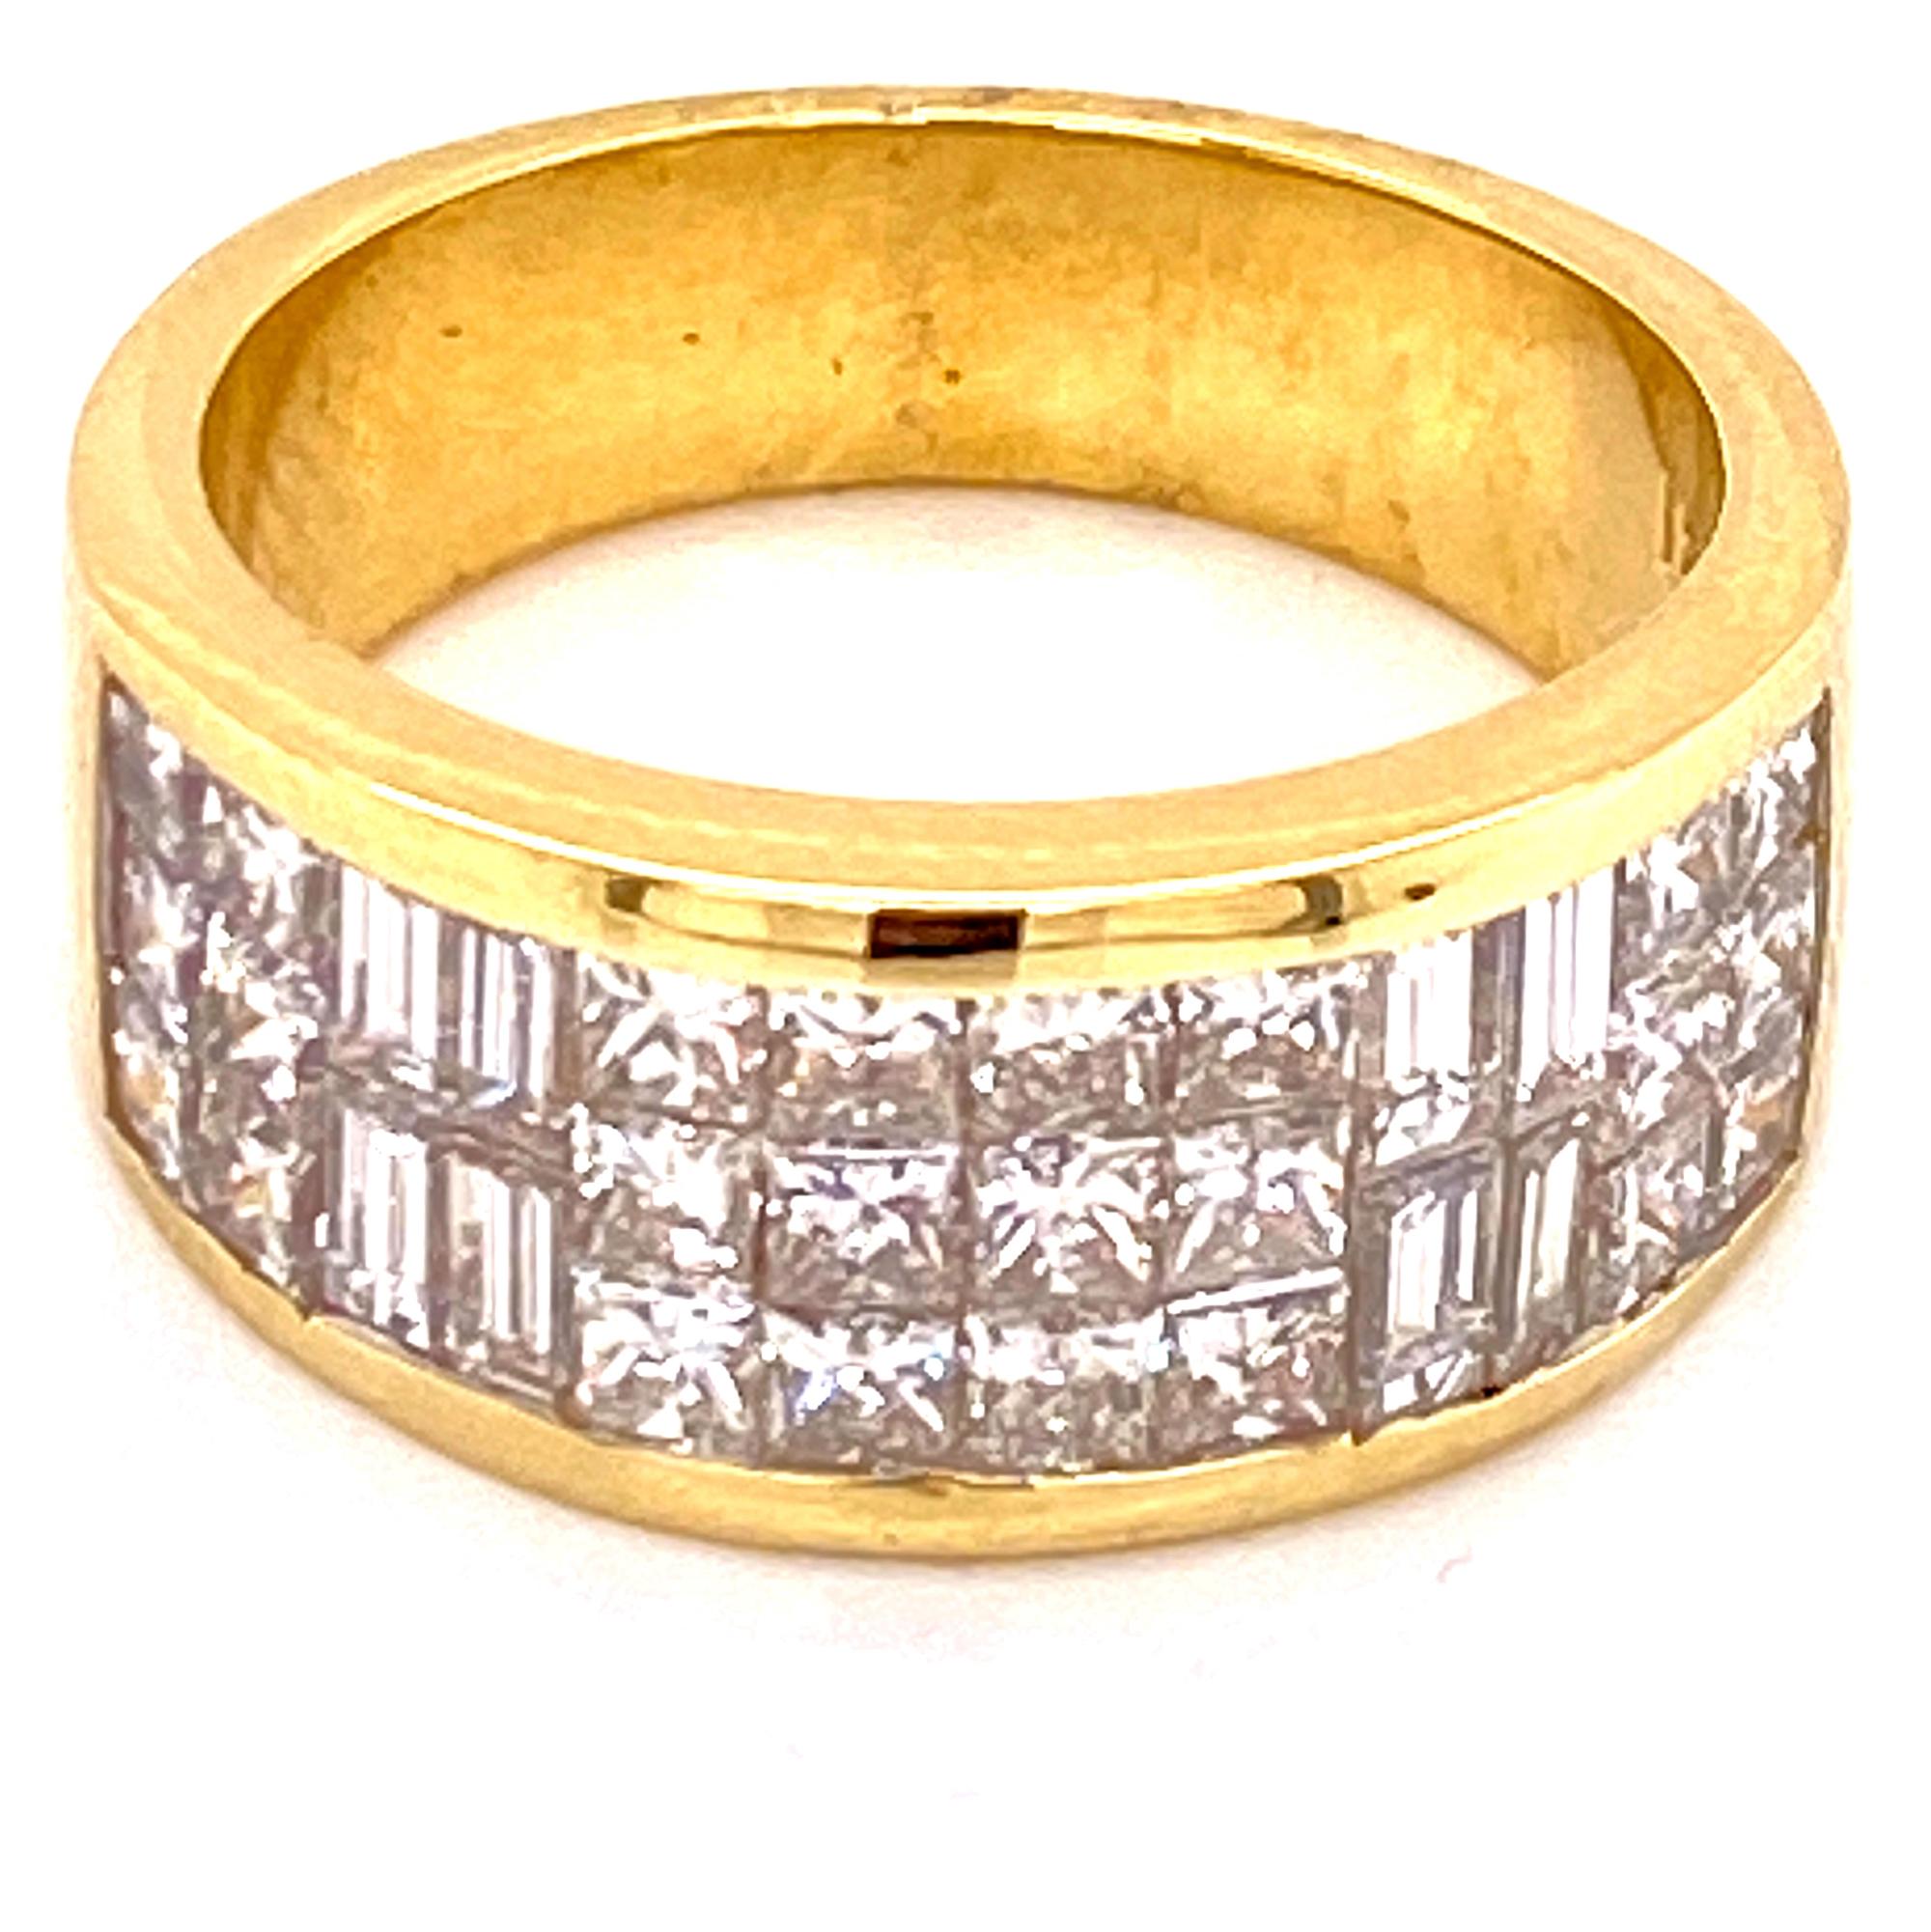 Fabulous diamond band ring fashioned in 18 karat yellow gold. The ring is invisibly set with sparkling princess and baguette cut diamonds weighing 2.26 carat total weight. The diamonds are graded G-H color and VS clarity. The band measures 9mm in